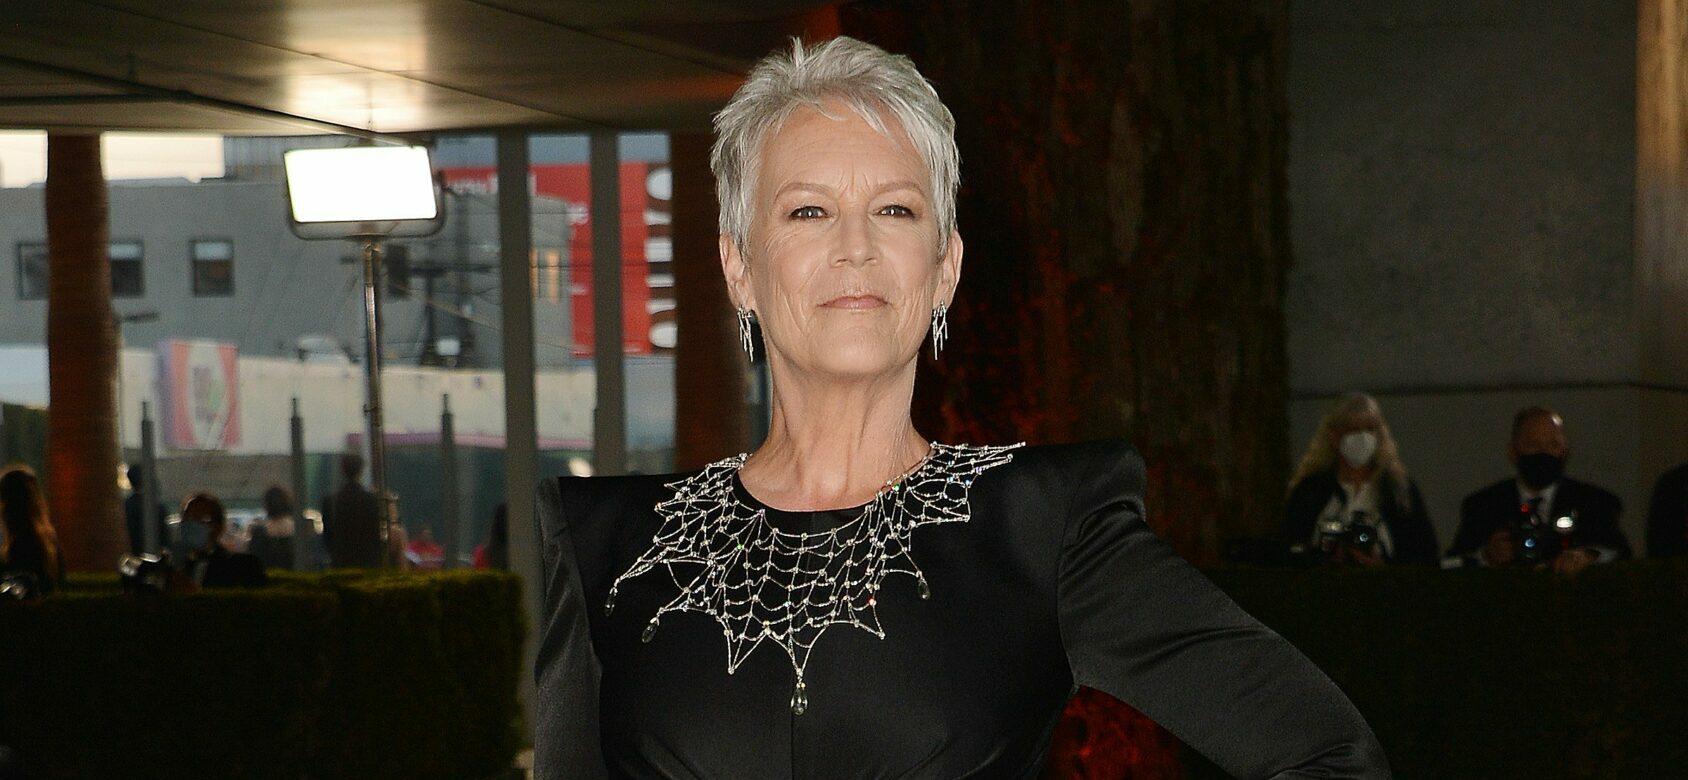 Jamie Lee Curtis at The Academy Museum of Motion Pictures Opening Gala